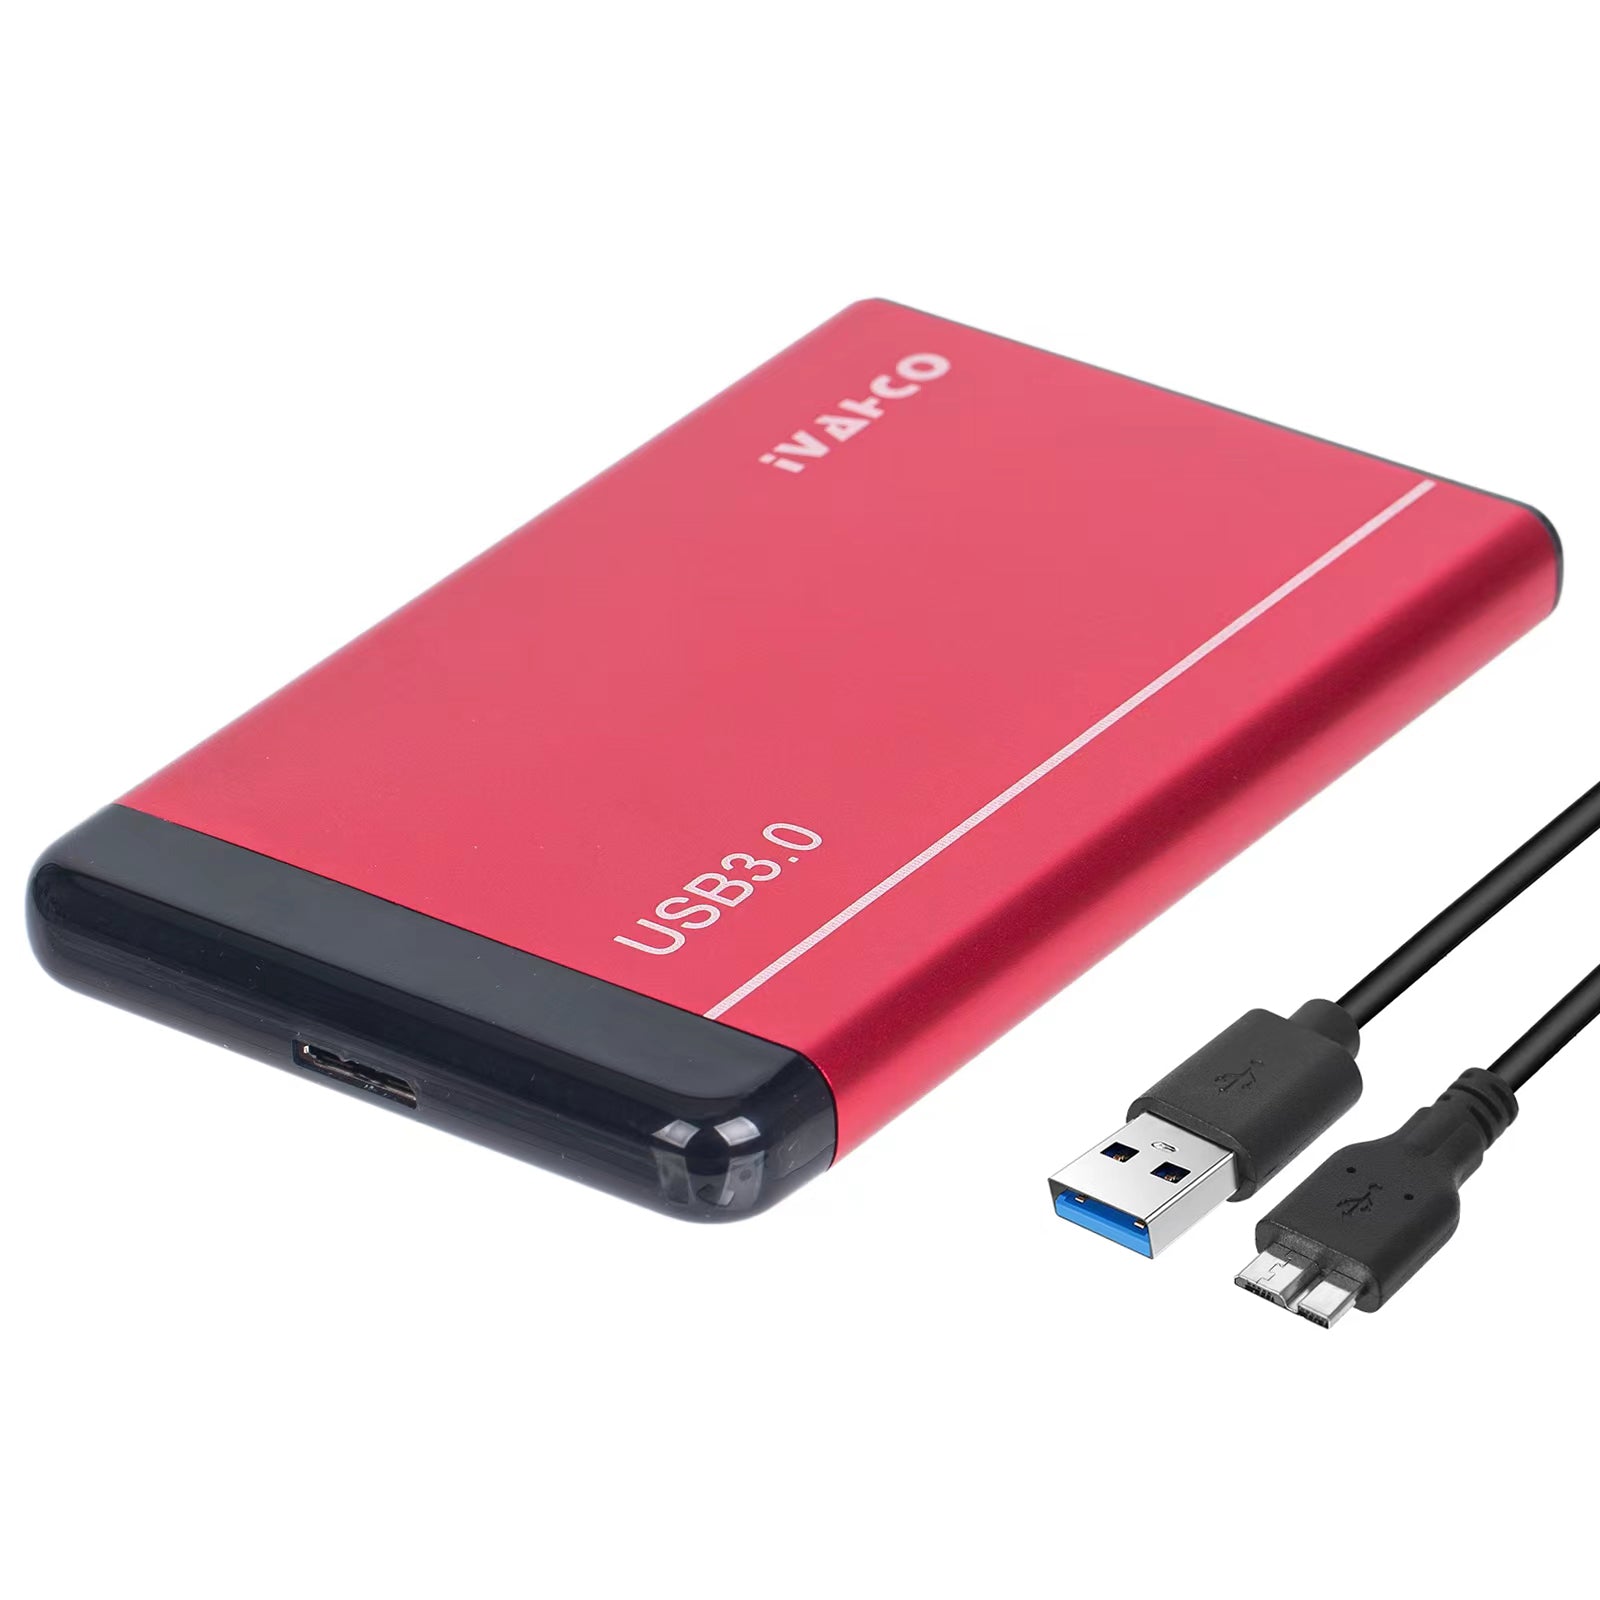 IVAHCO 750GB Matte Hard Drive Box 2.5" HDD External Case USB3.0 Hard Disk Enclosure with Data Cable - Red